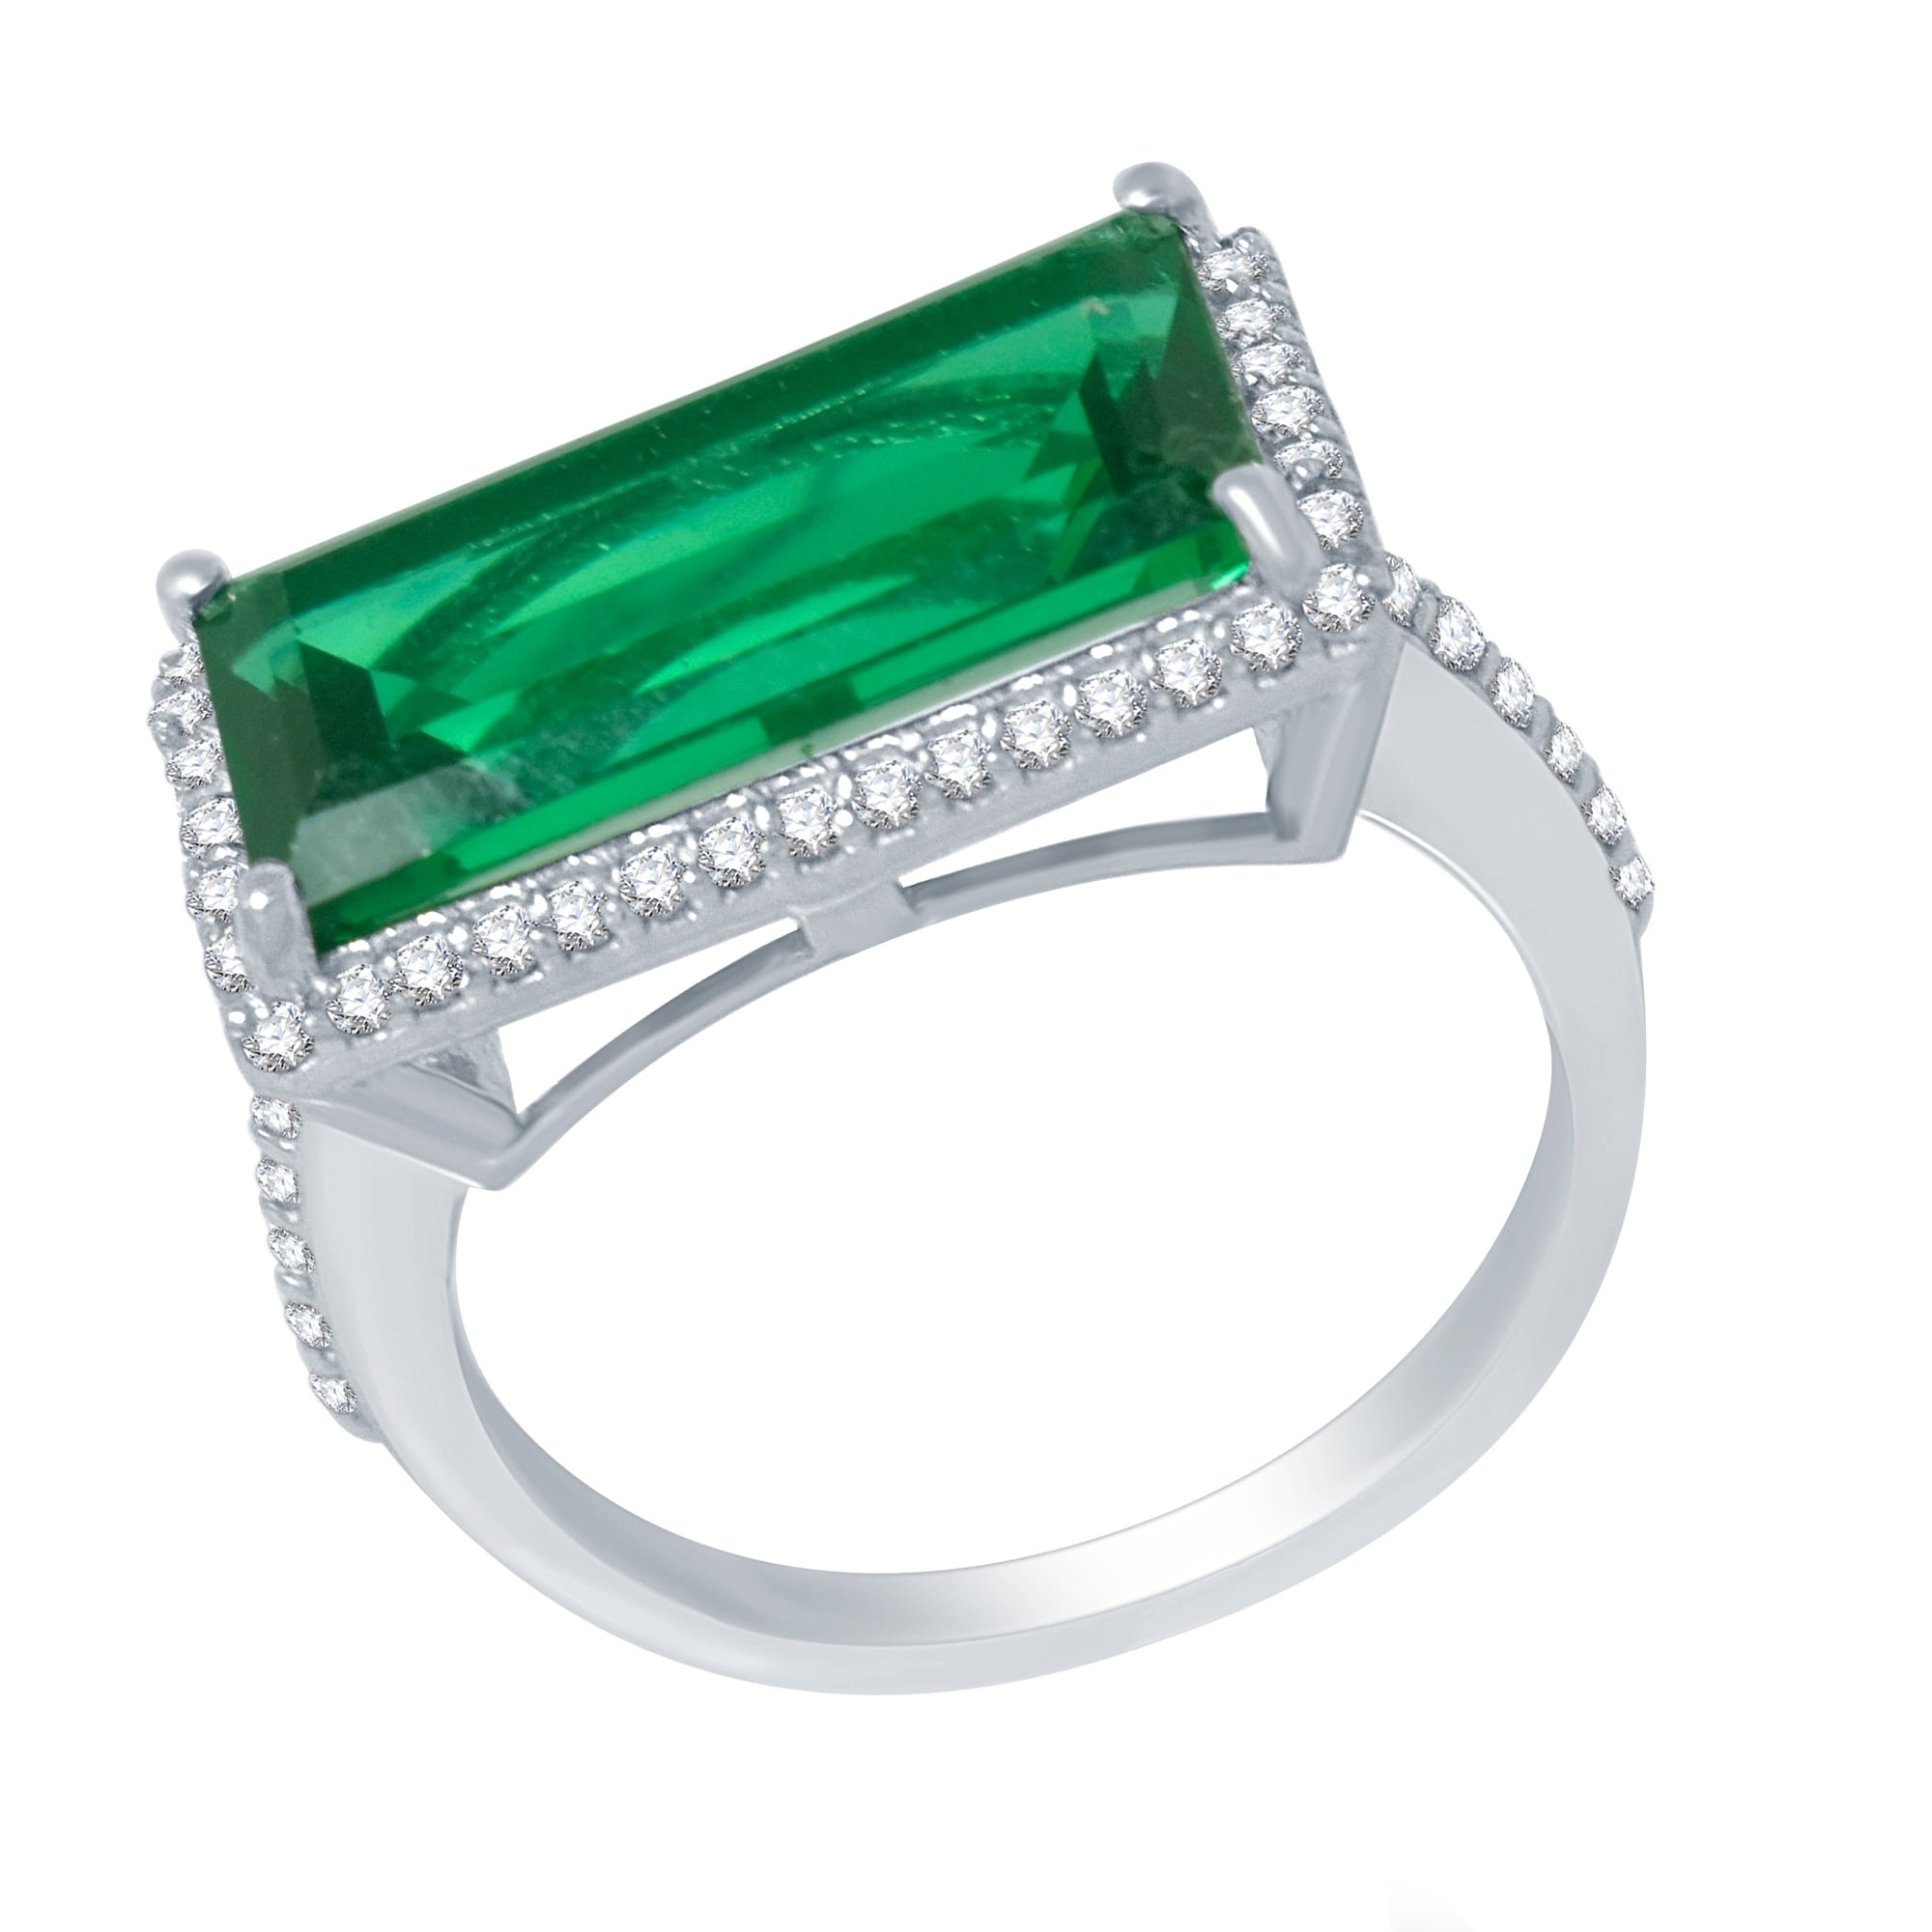 Details about   925 Sterling Silver Natural Emerald Ring Green Halo Size 4-11